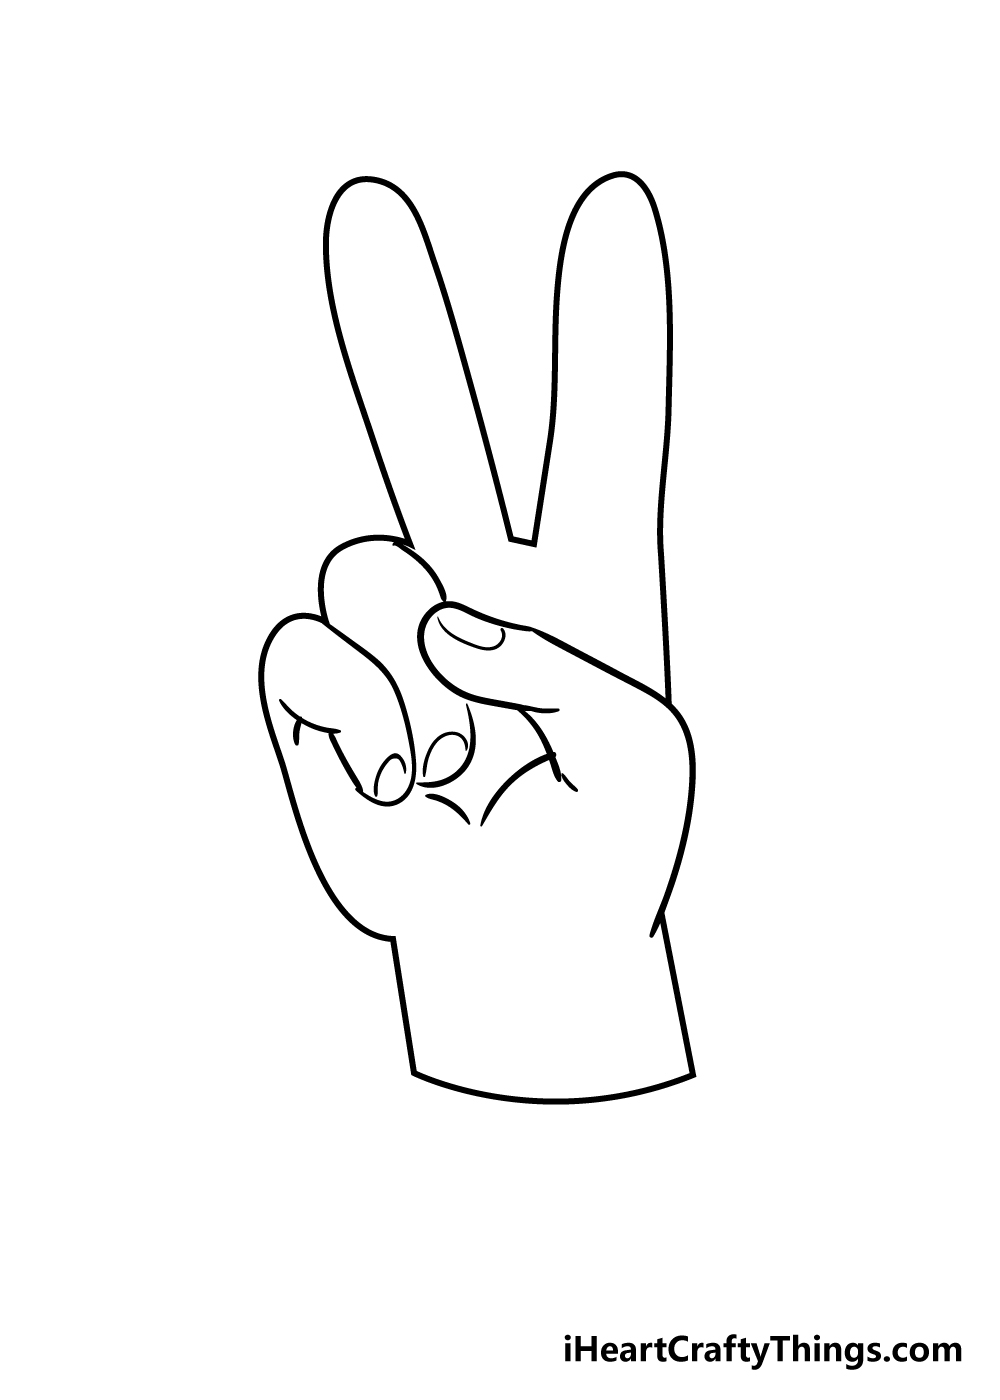 peace sign drawing step 4